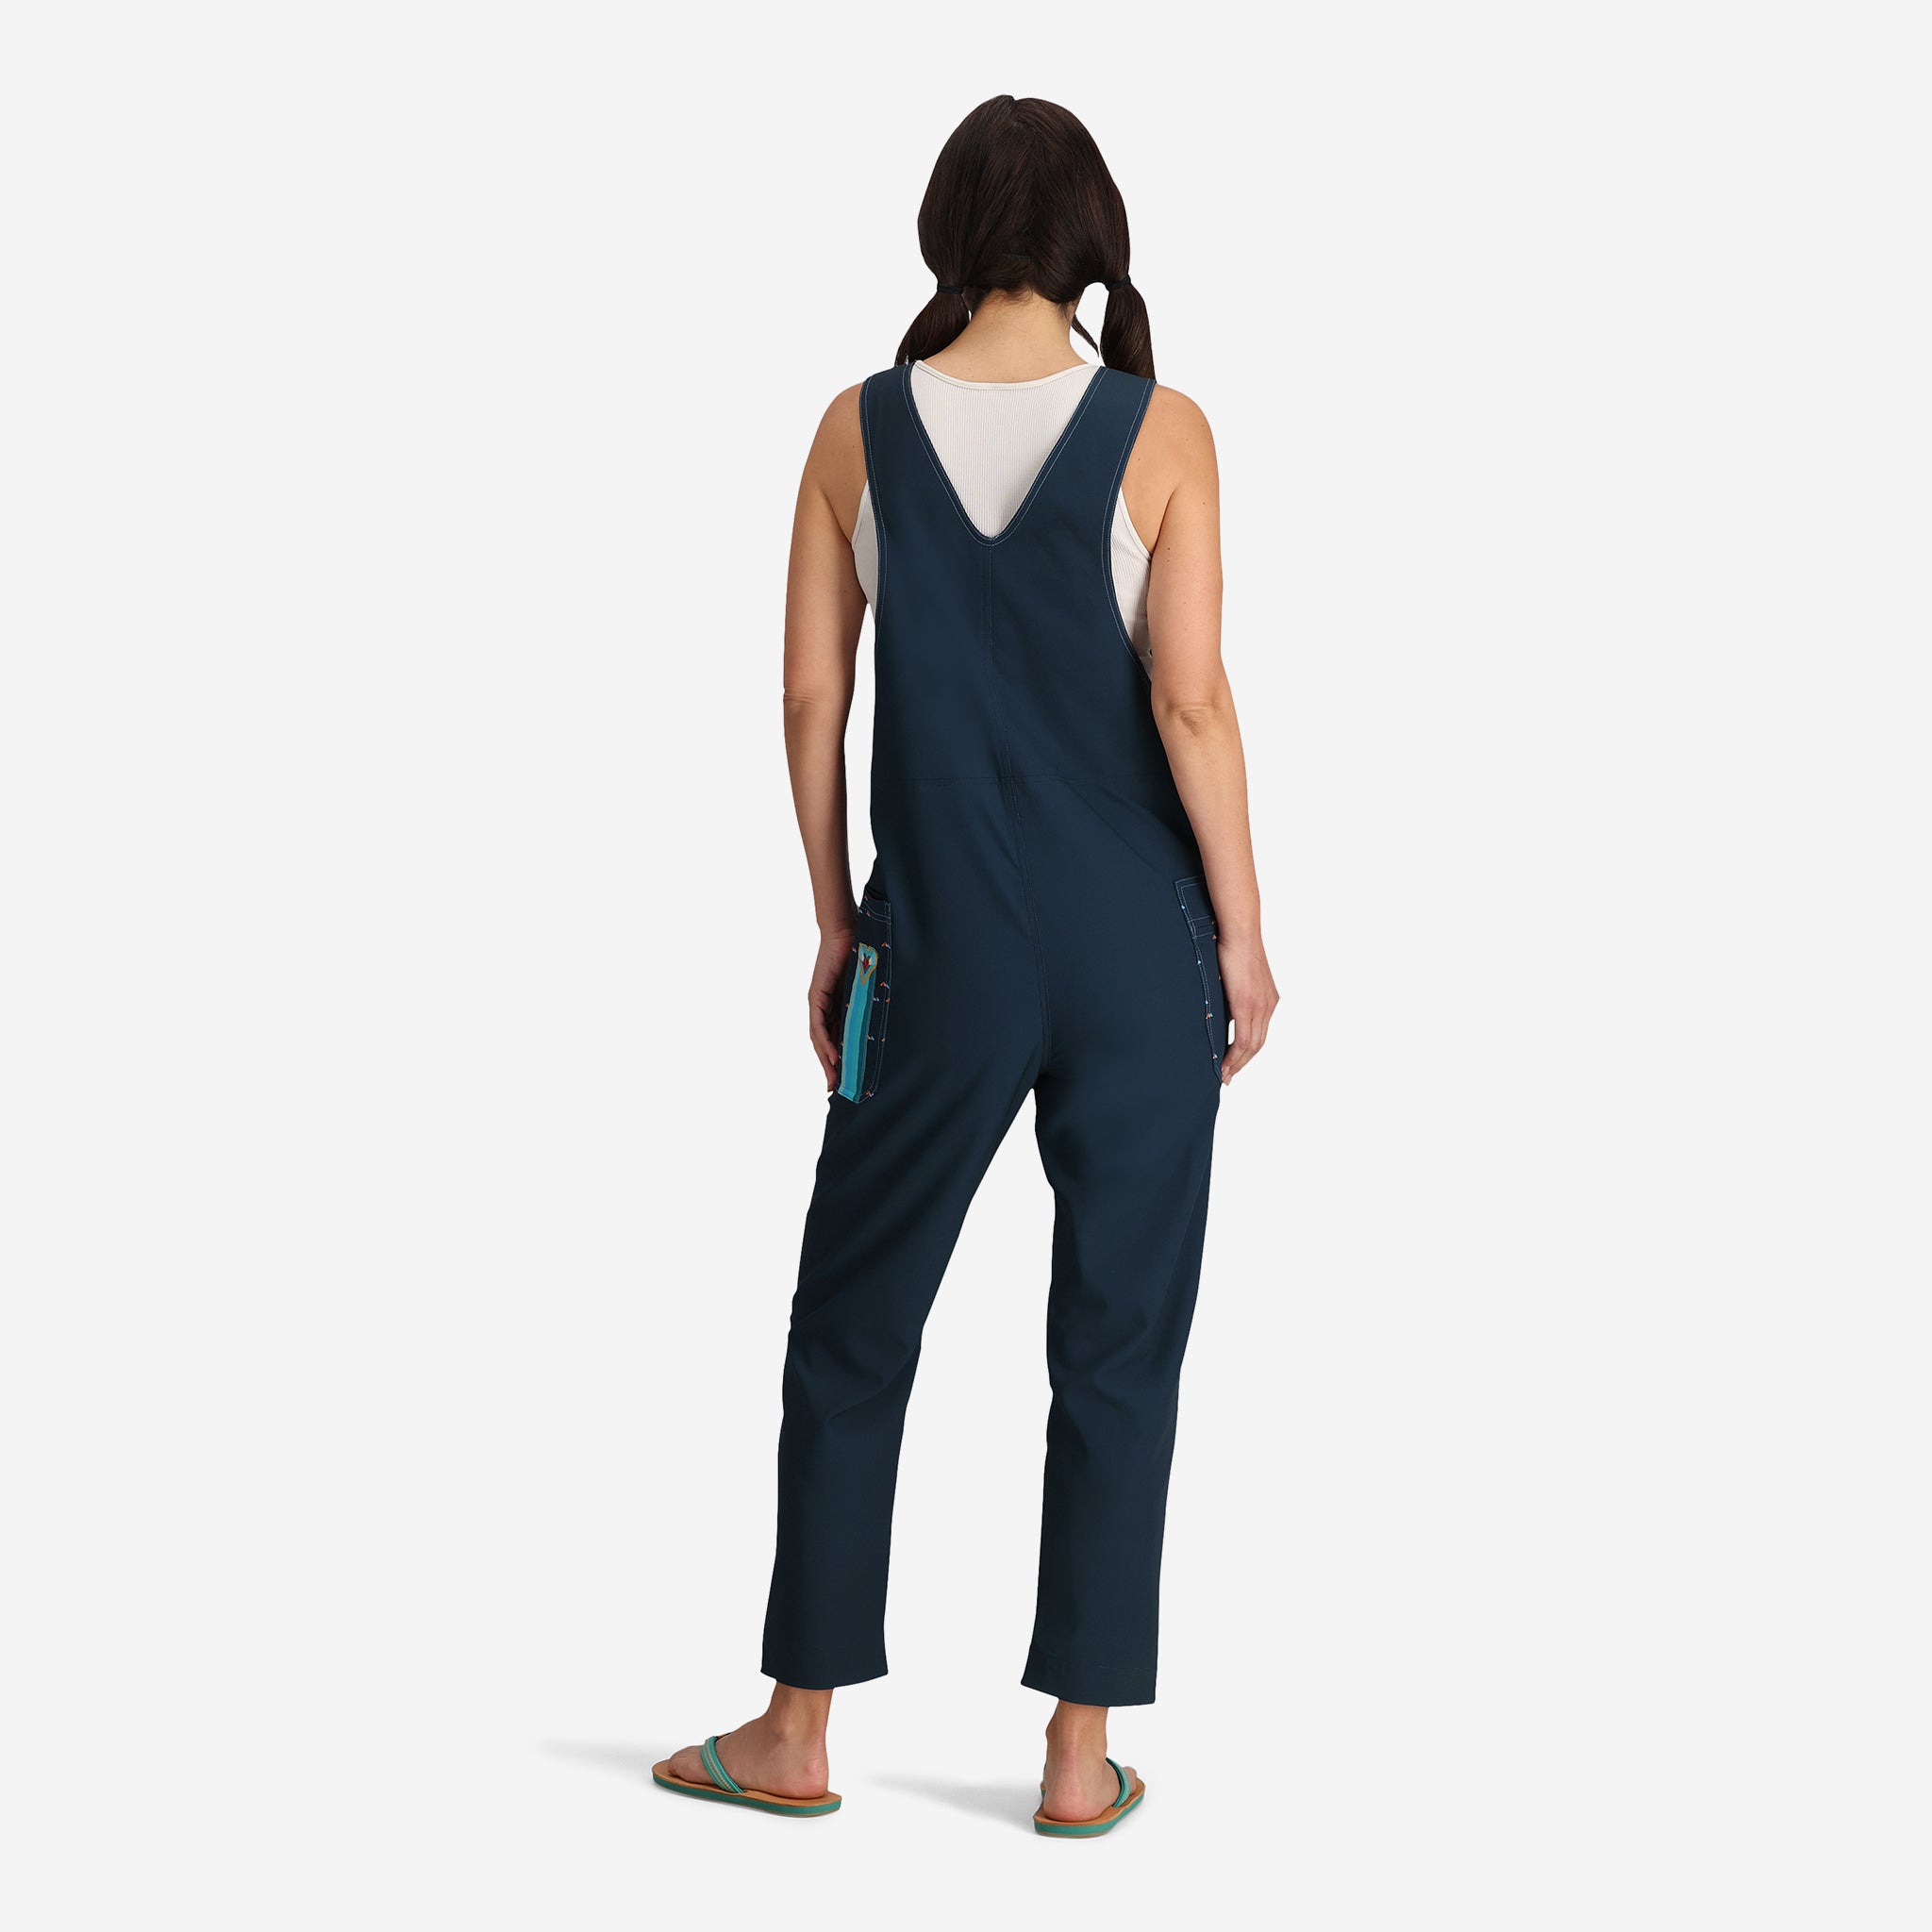 Women's Open Hearts All Day Overalls